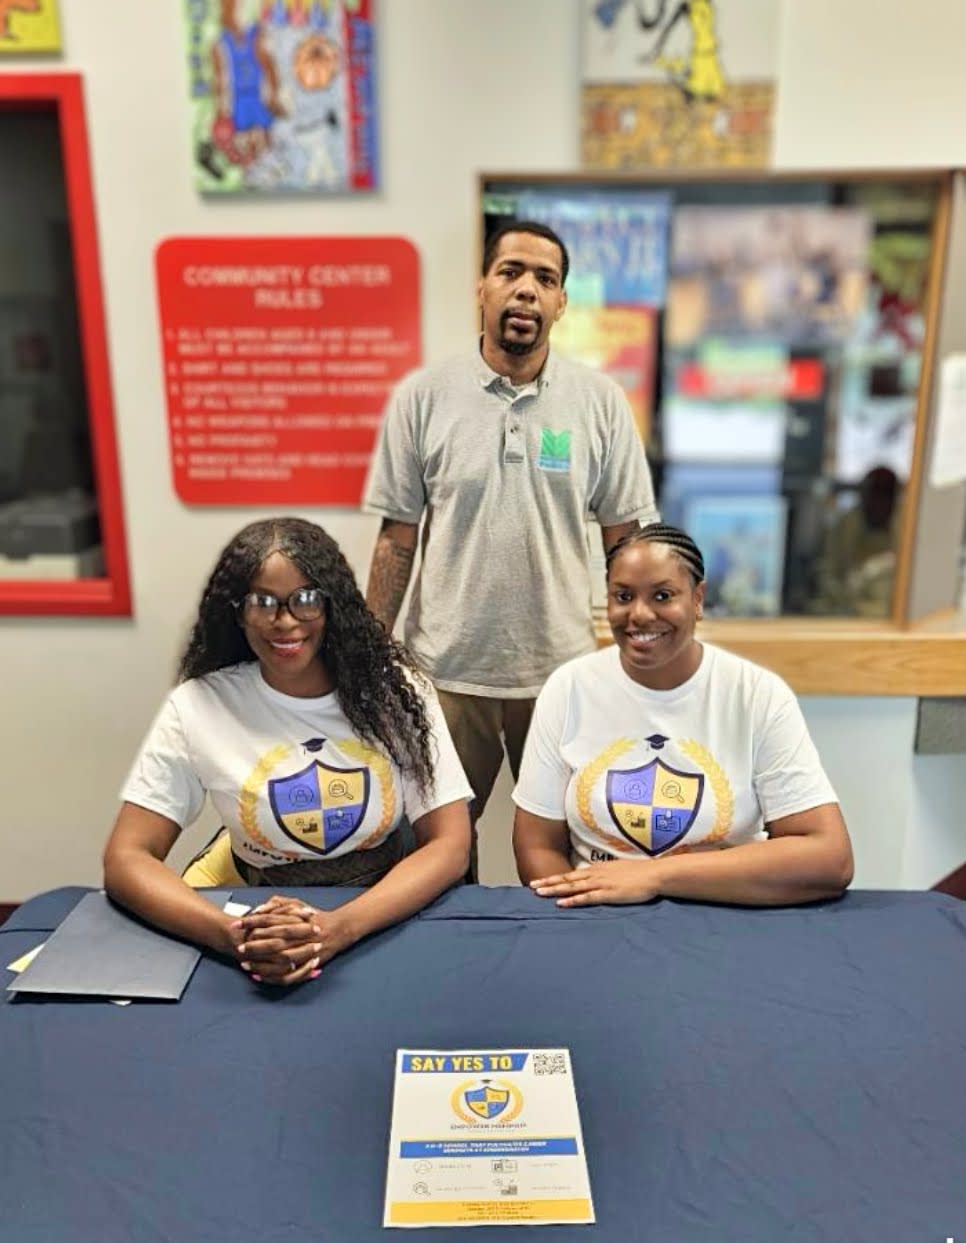 Empower Memphis founder Muna Olaniyi (left), with Latetrica Wilson of Tennesseans for Student Success (right), and an employee of Glenview Community Center (center).